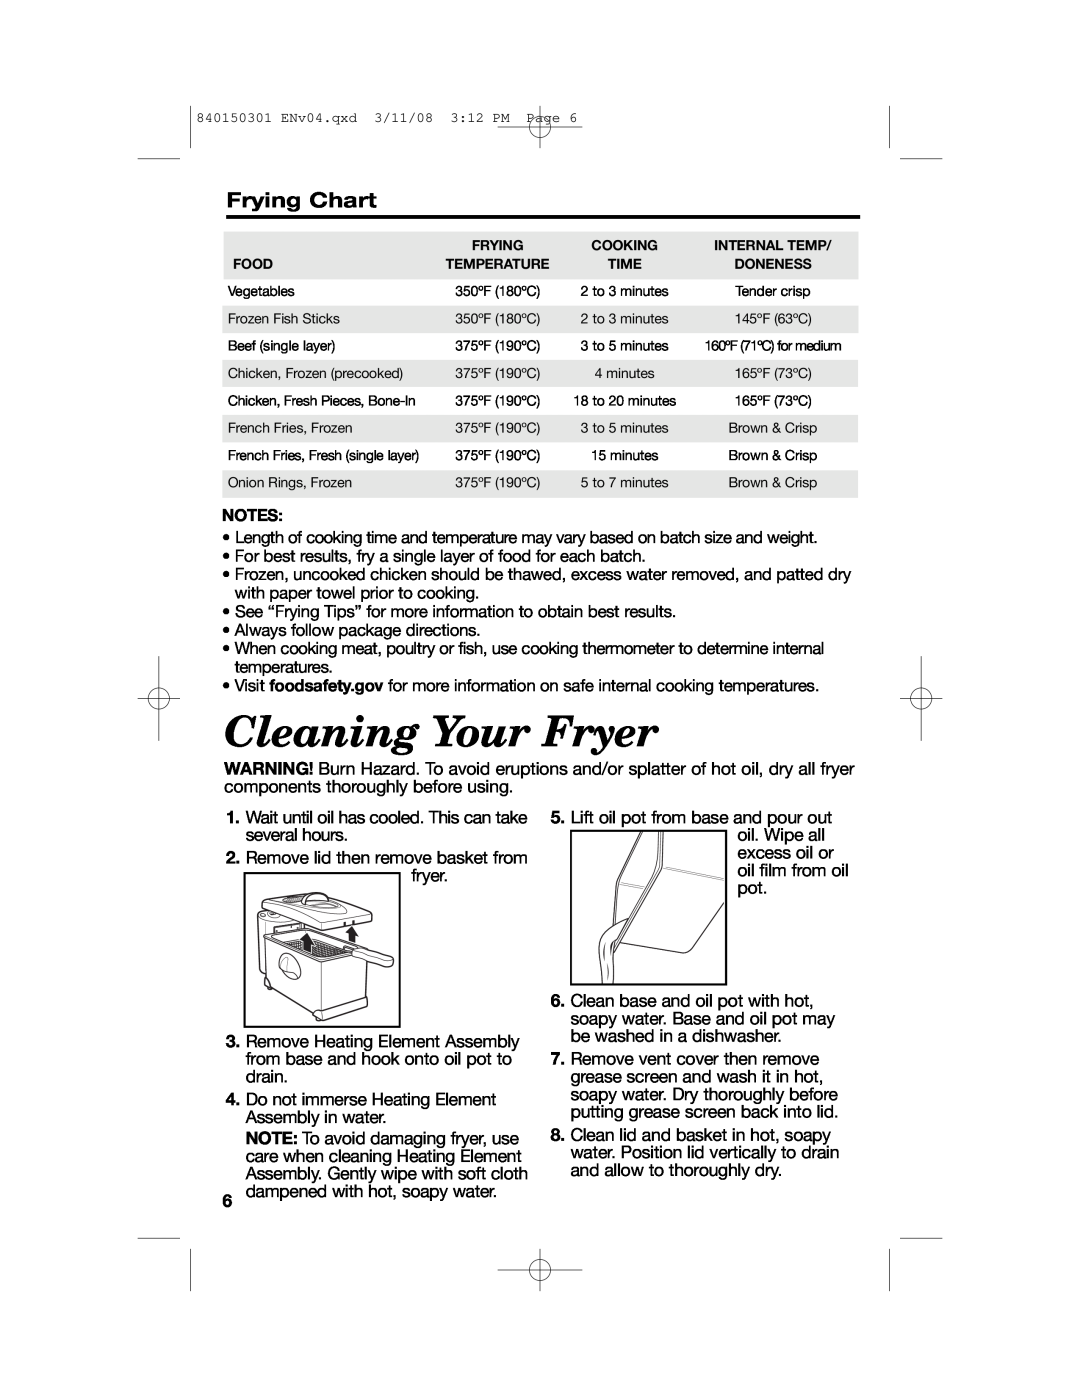 Hamilton Beach 35030C manual Cleaning Your Fryer, Frying Chart 